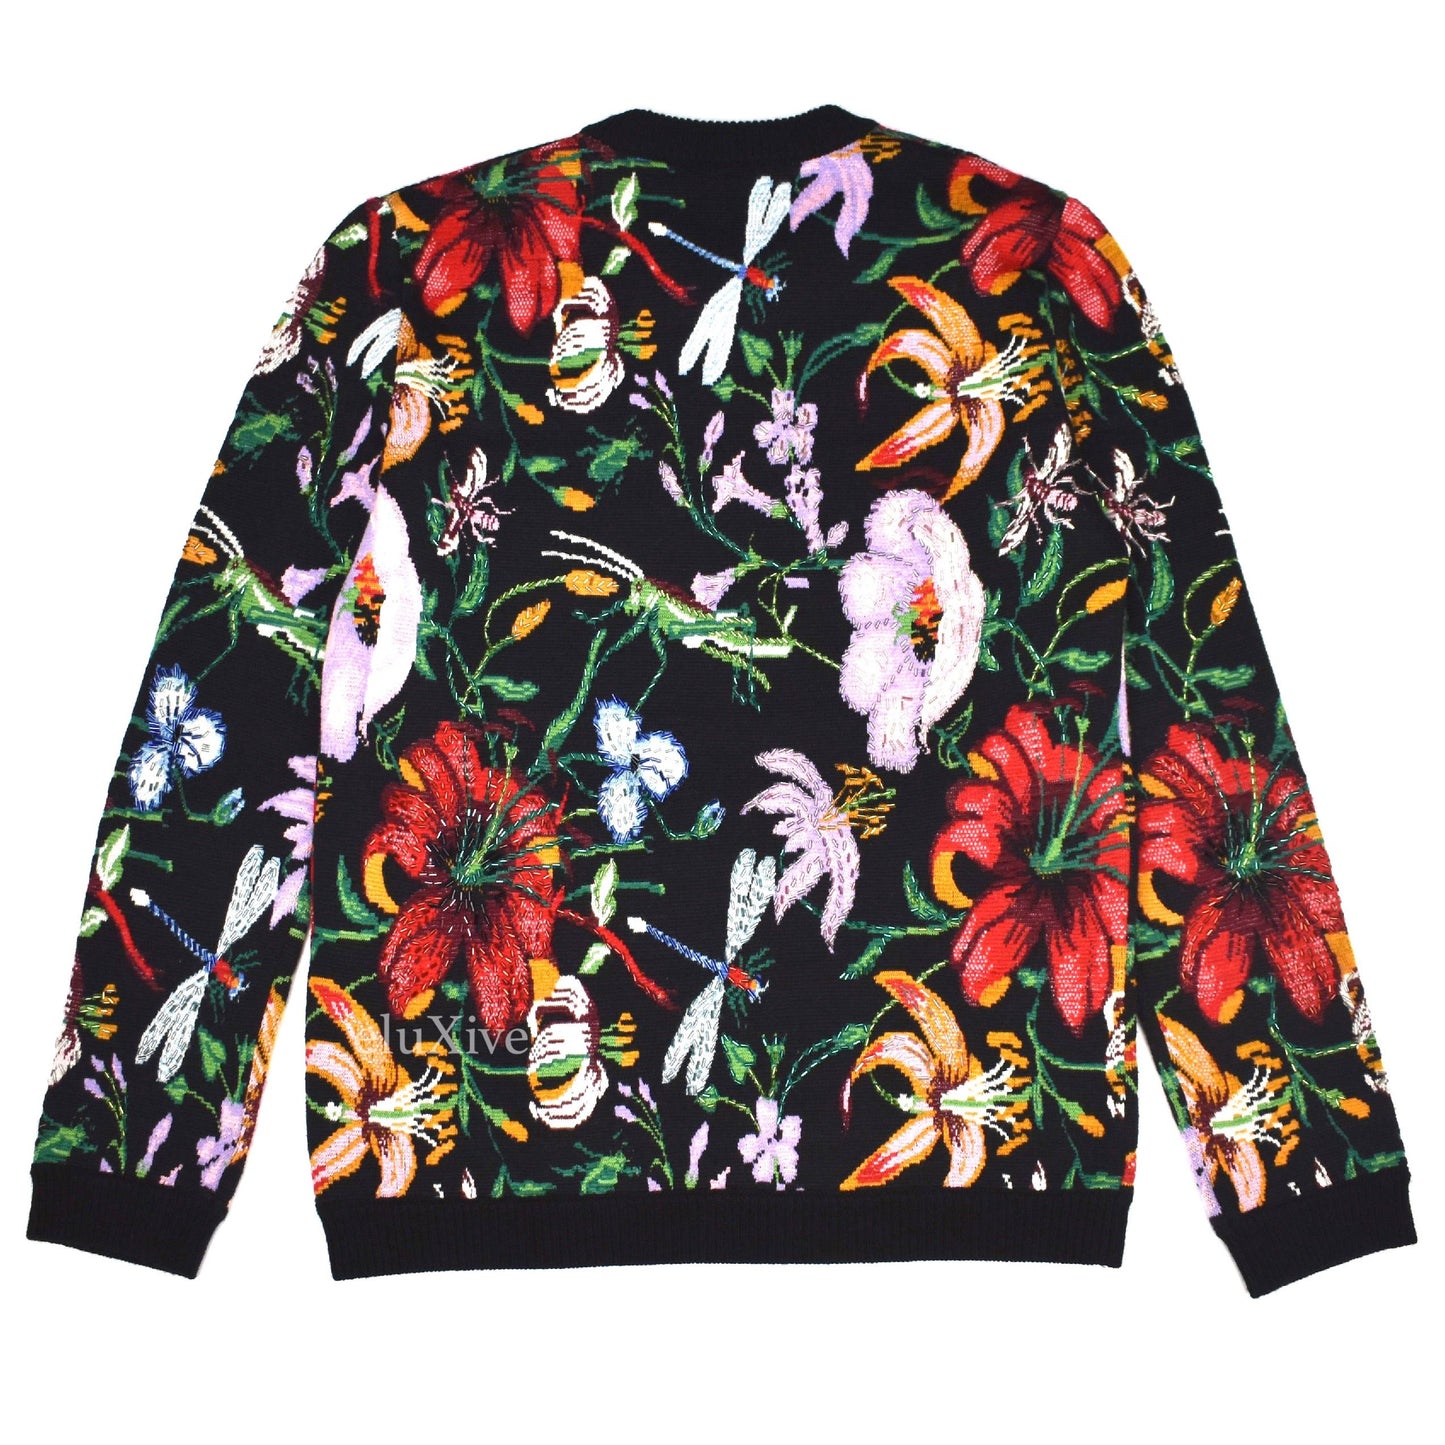 Gucci - Beaded Floral Intarsia Knit Sweater